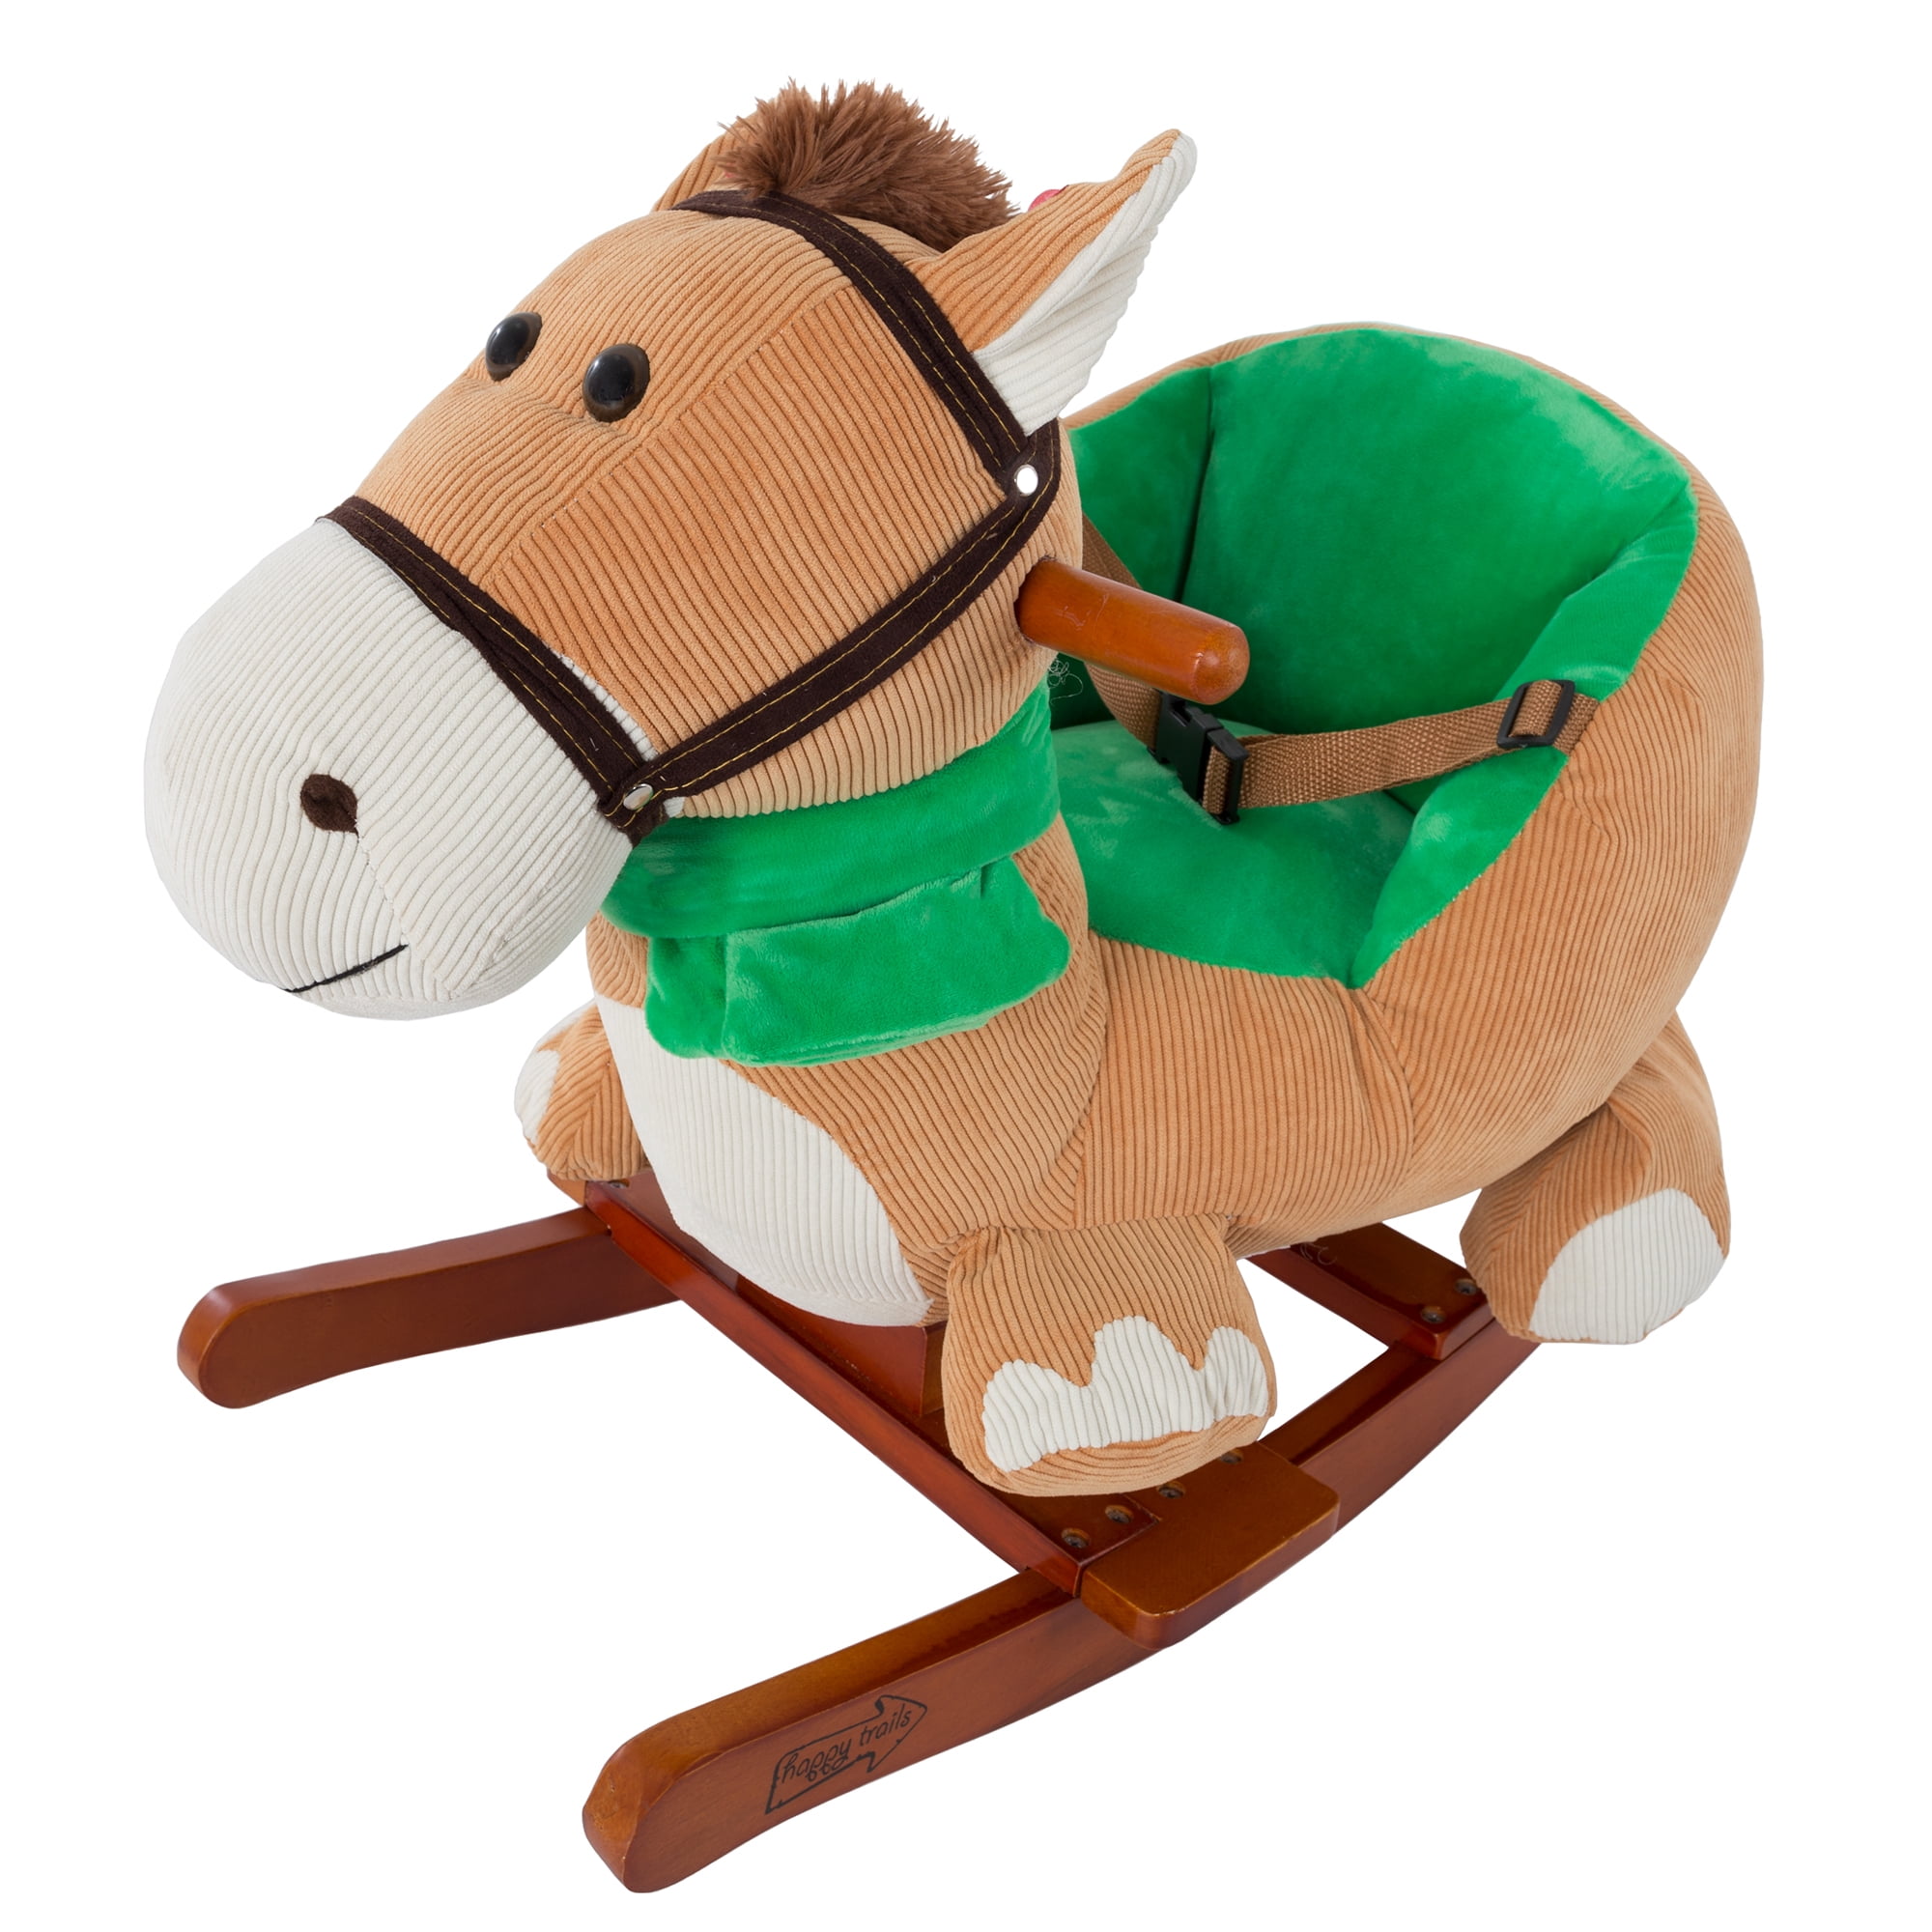 Buy Wooden Baby Horse on Wheels Toy Online